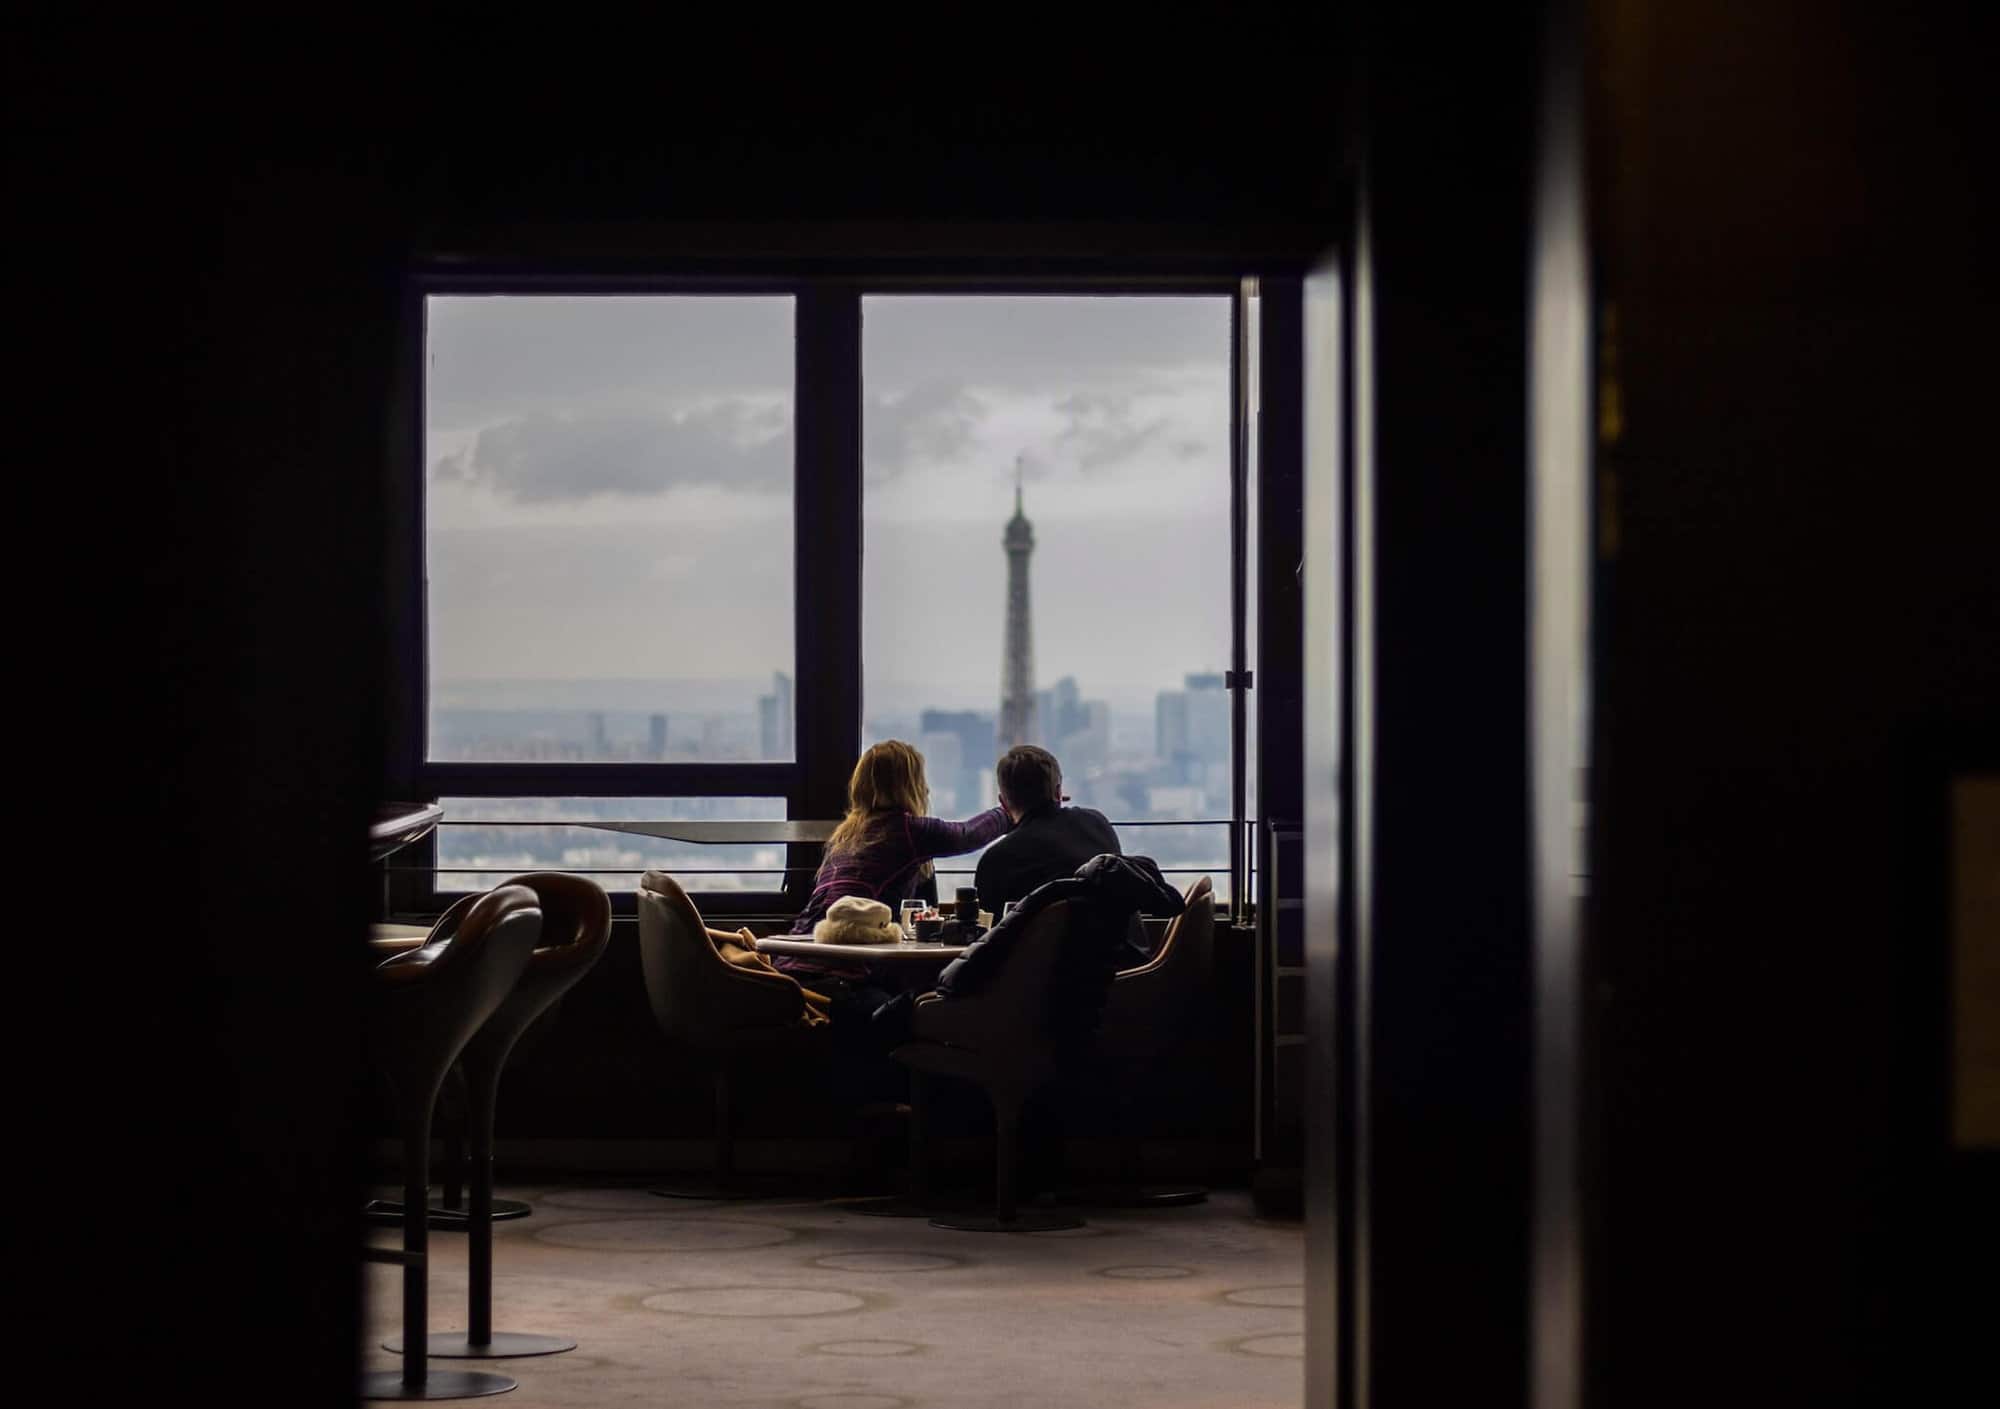 A man and a woman in a bar or restaurant look out a window where they can see Paris and the Eiffel Tower. The woman is on the left and she is pointing at the Eiffel Tower. The man is to her right.